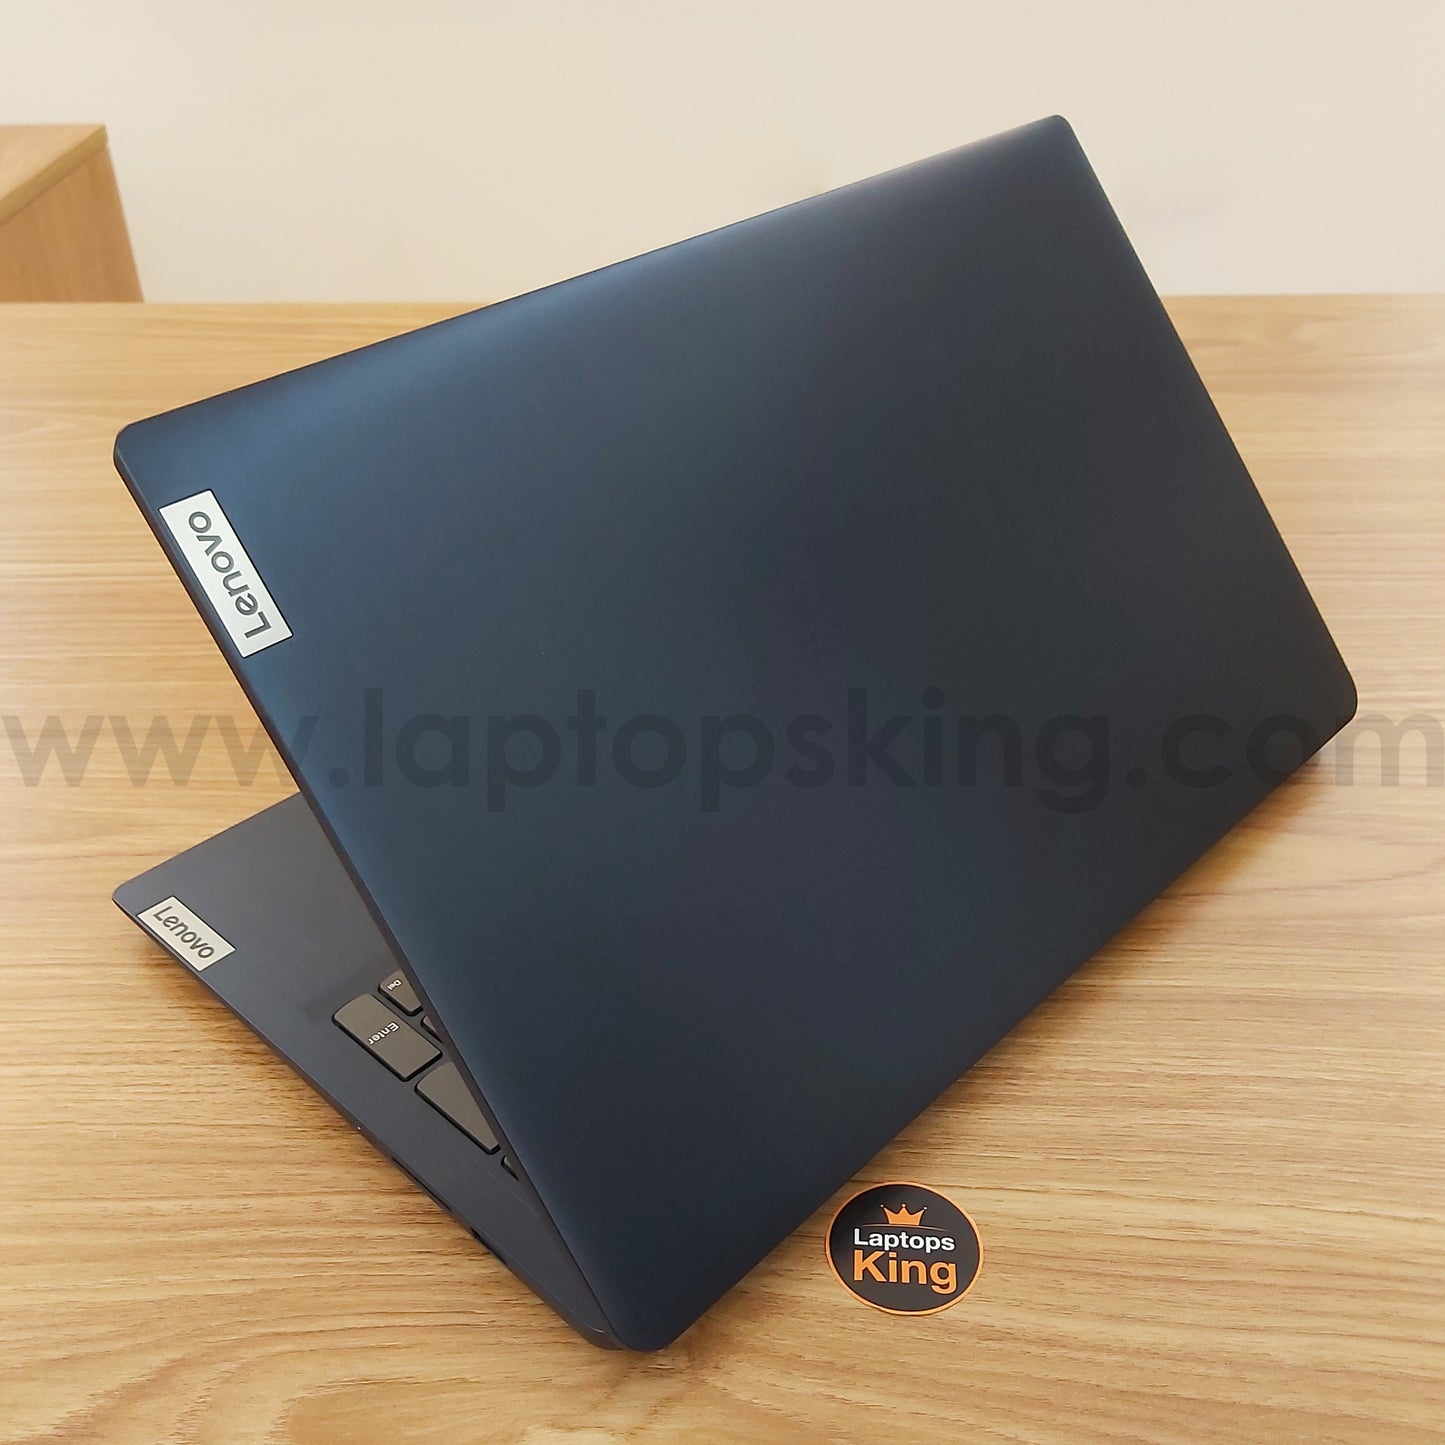 Lenovo Ideapad 3 82h8 / 15itl6  i7-1165g7 Mx450 Laptop Offers (Brand New) Computer for sale Lebanon, laptop in Lebanon, laptop for sale Lebanon, best programming laptop, laptop for sale in Lebanon, laptops for sale in Lebanon, laptop for sale in Lebanon, buy computer Lebanon, buy laptop Lebanon.